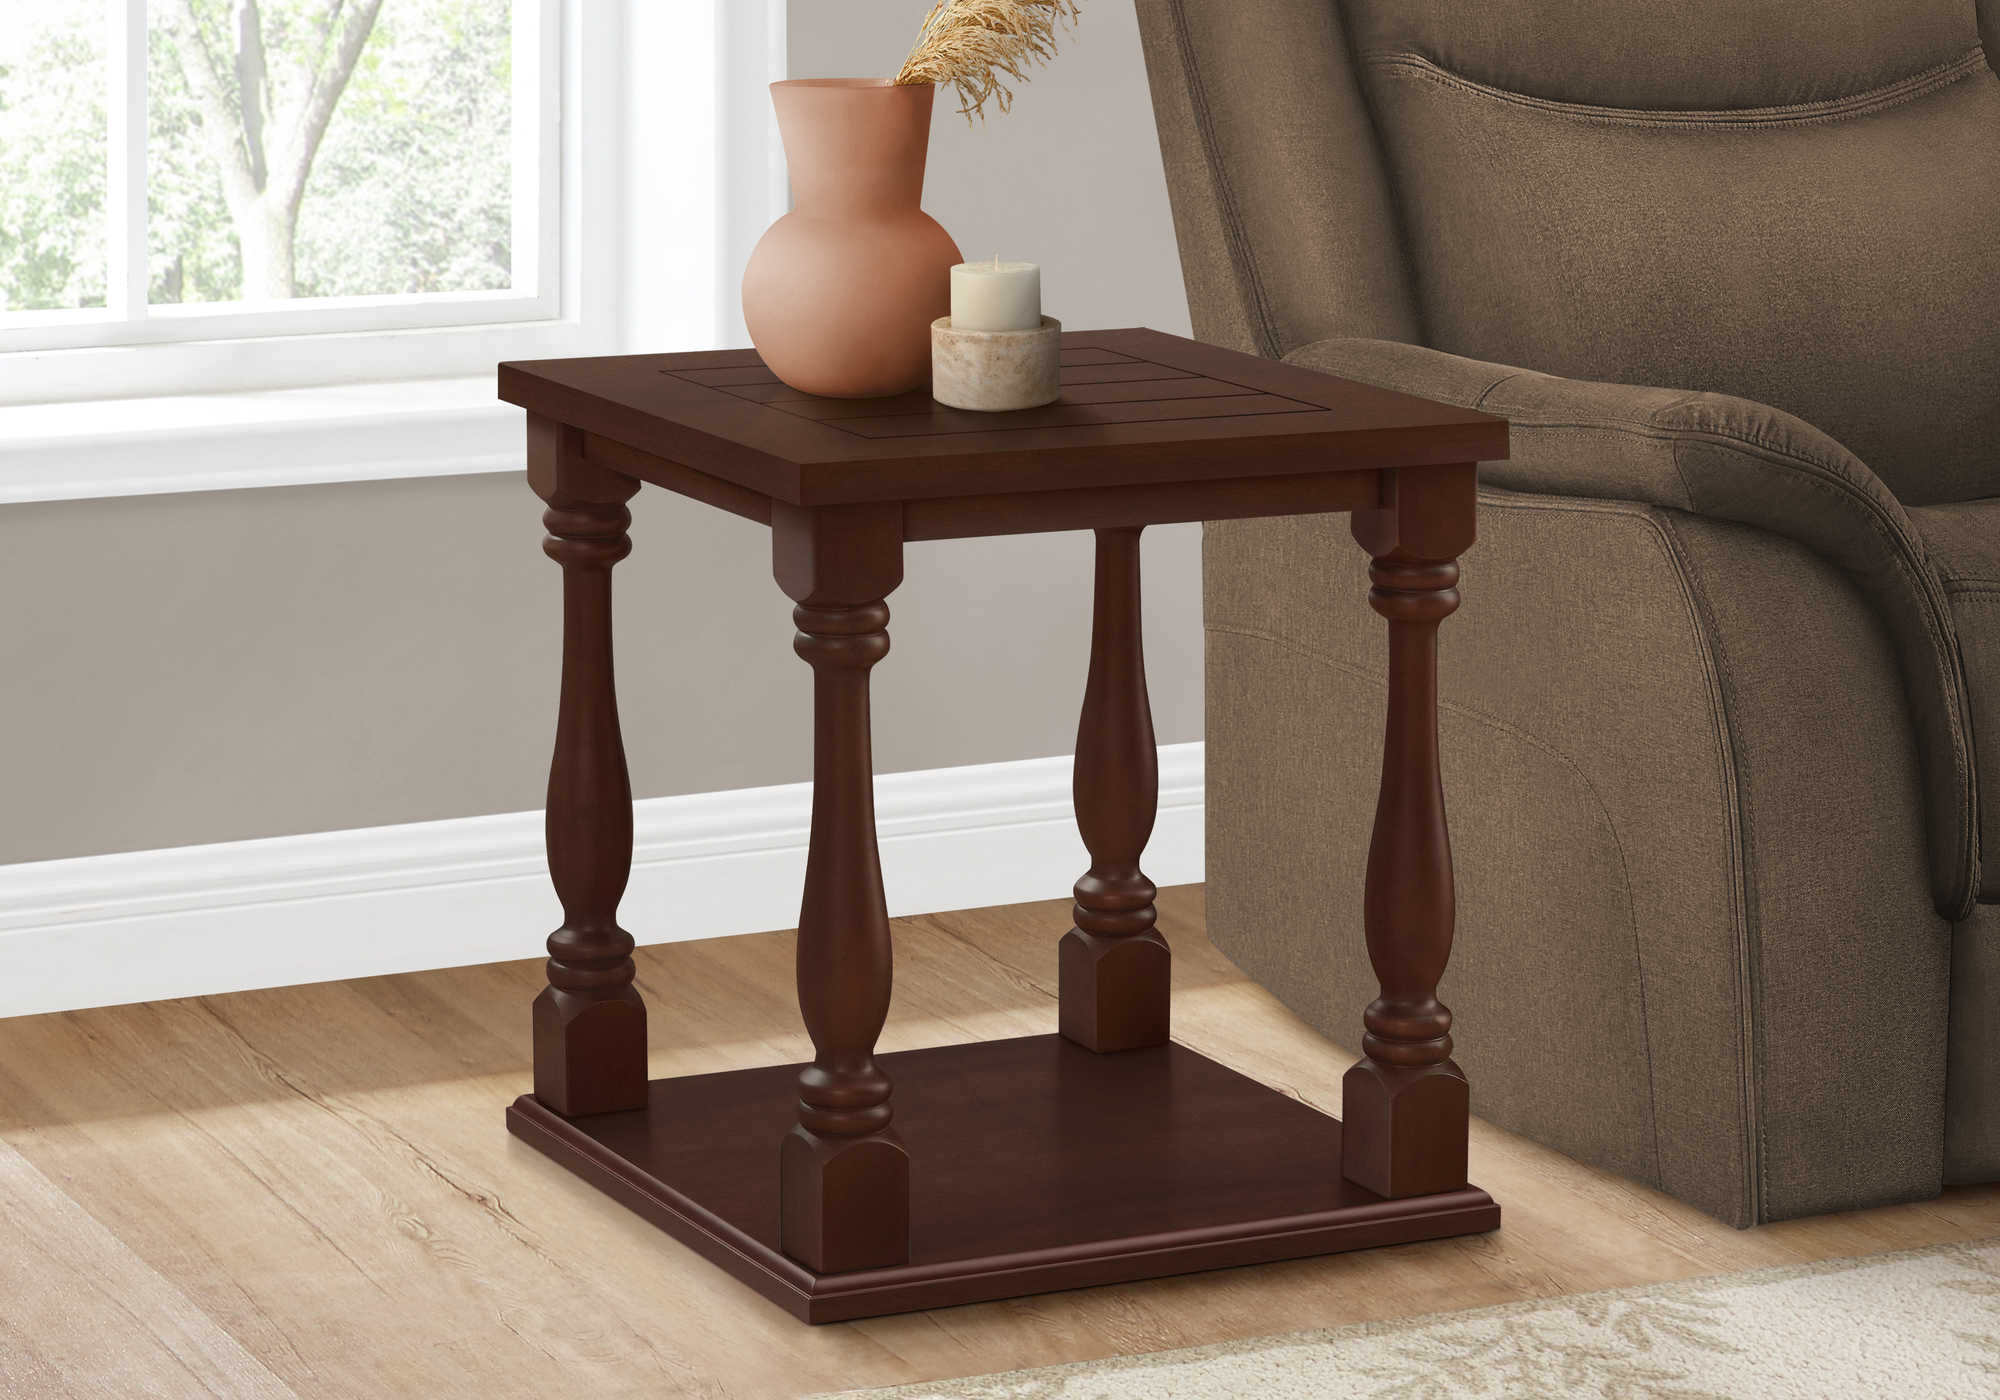 ACCENT TABLE - 25"H / ESPRESSO VENEER END TABLE